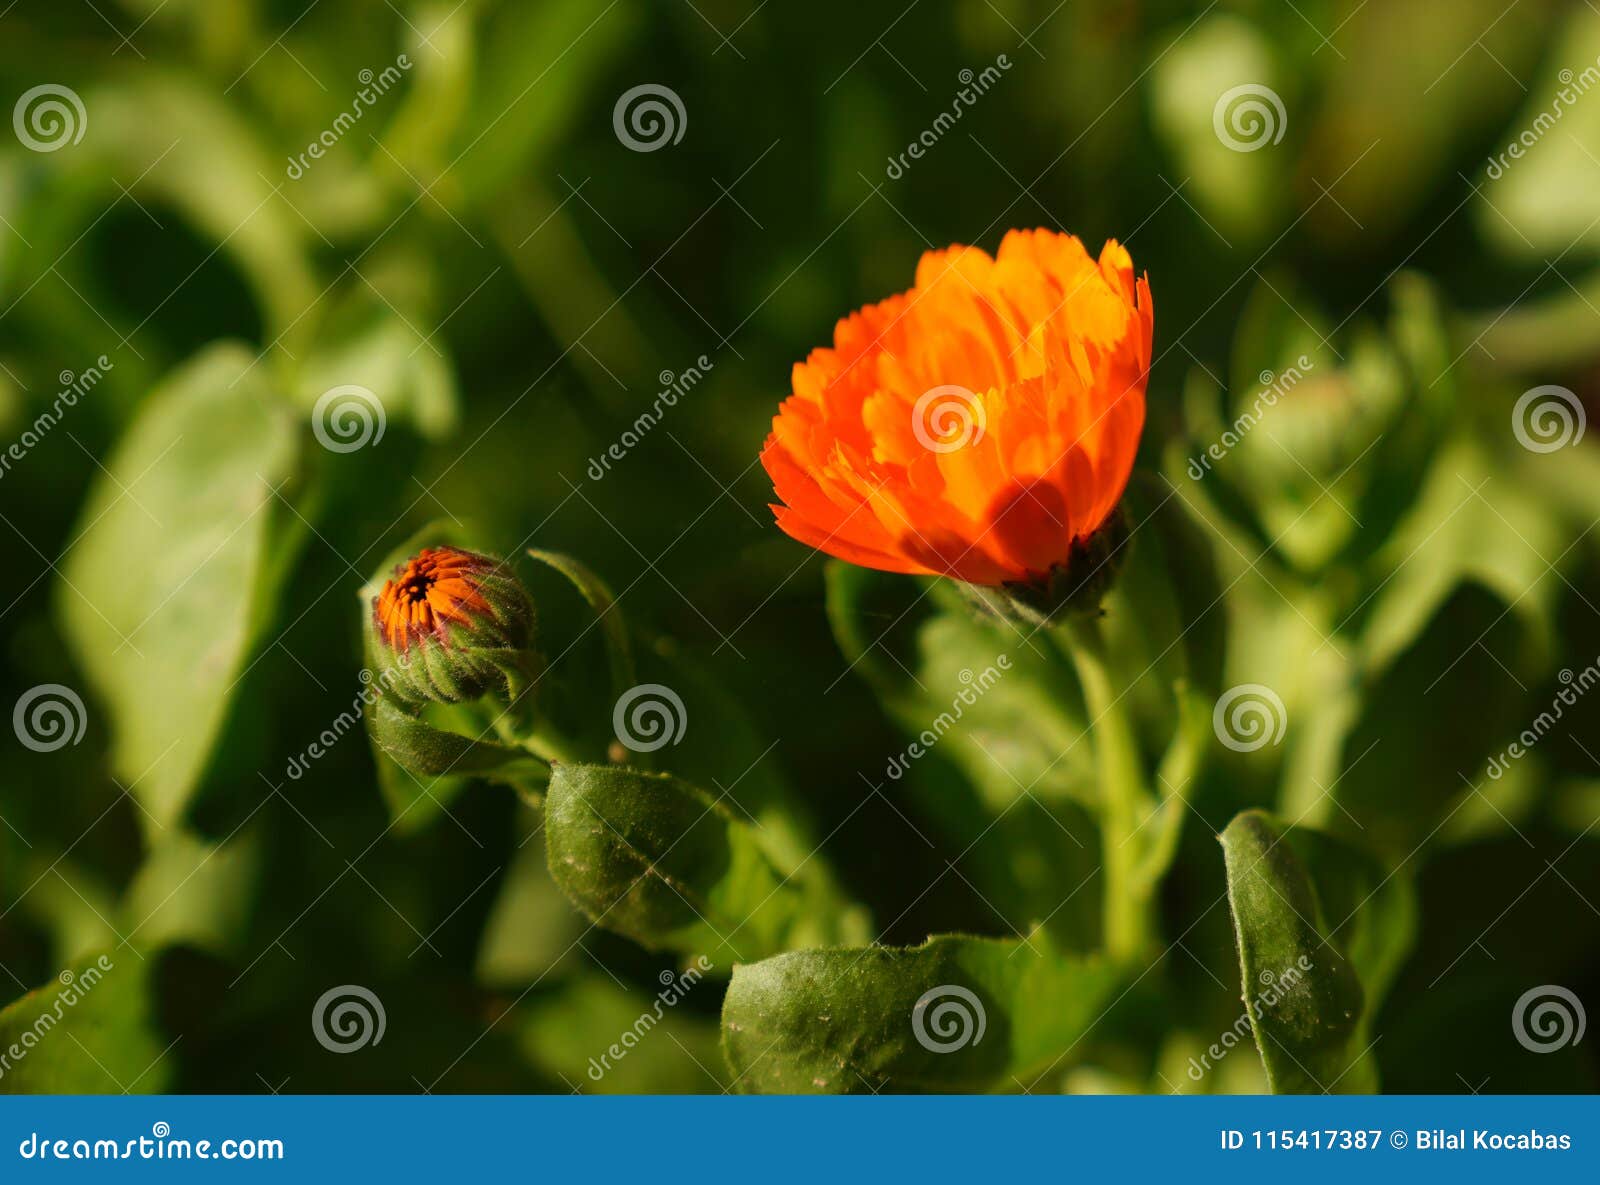 Calendula Officinalis Marigold Flower And Bud With Leaf In Garden And Blurred Background Stock Image Image Of Flower Herb 115417387